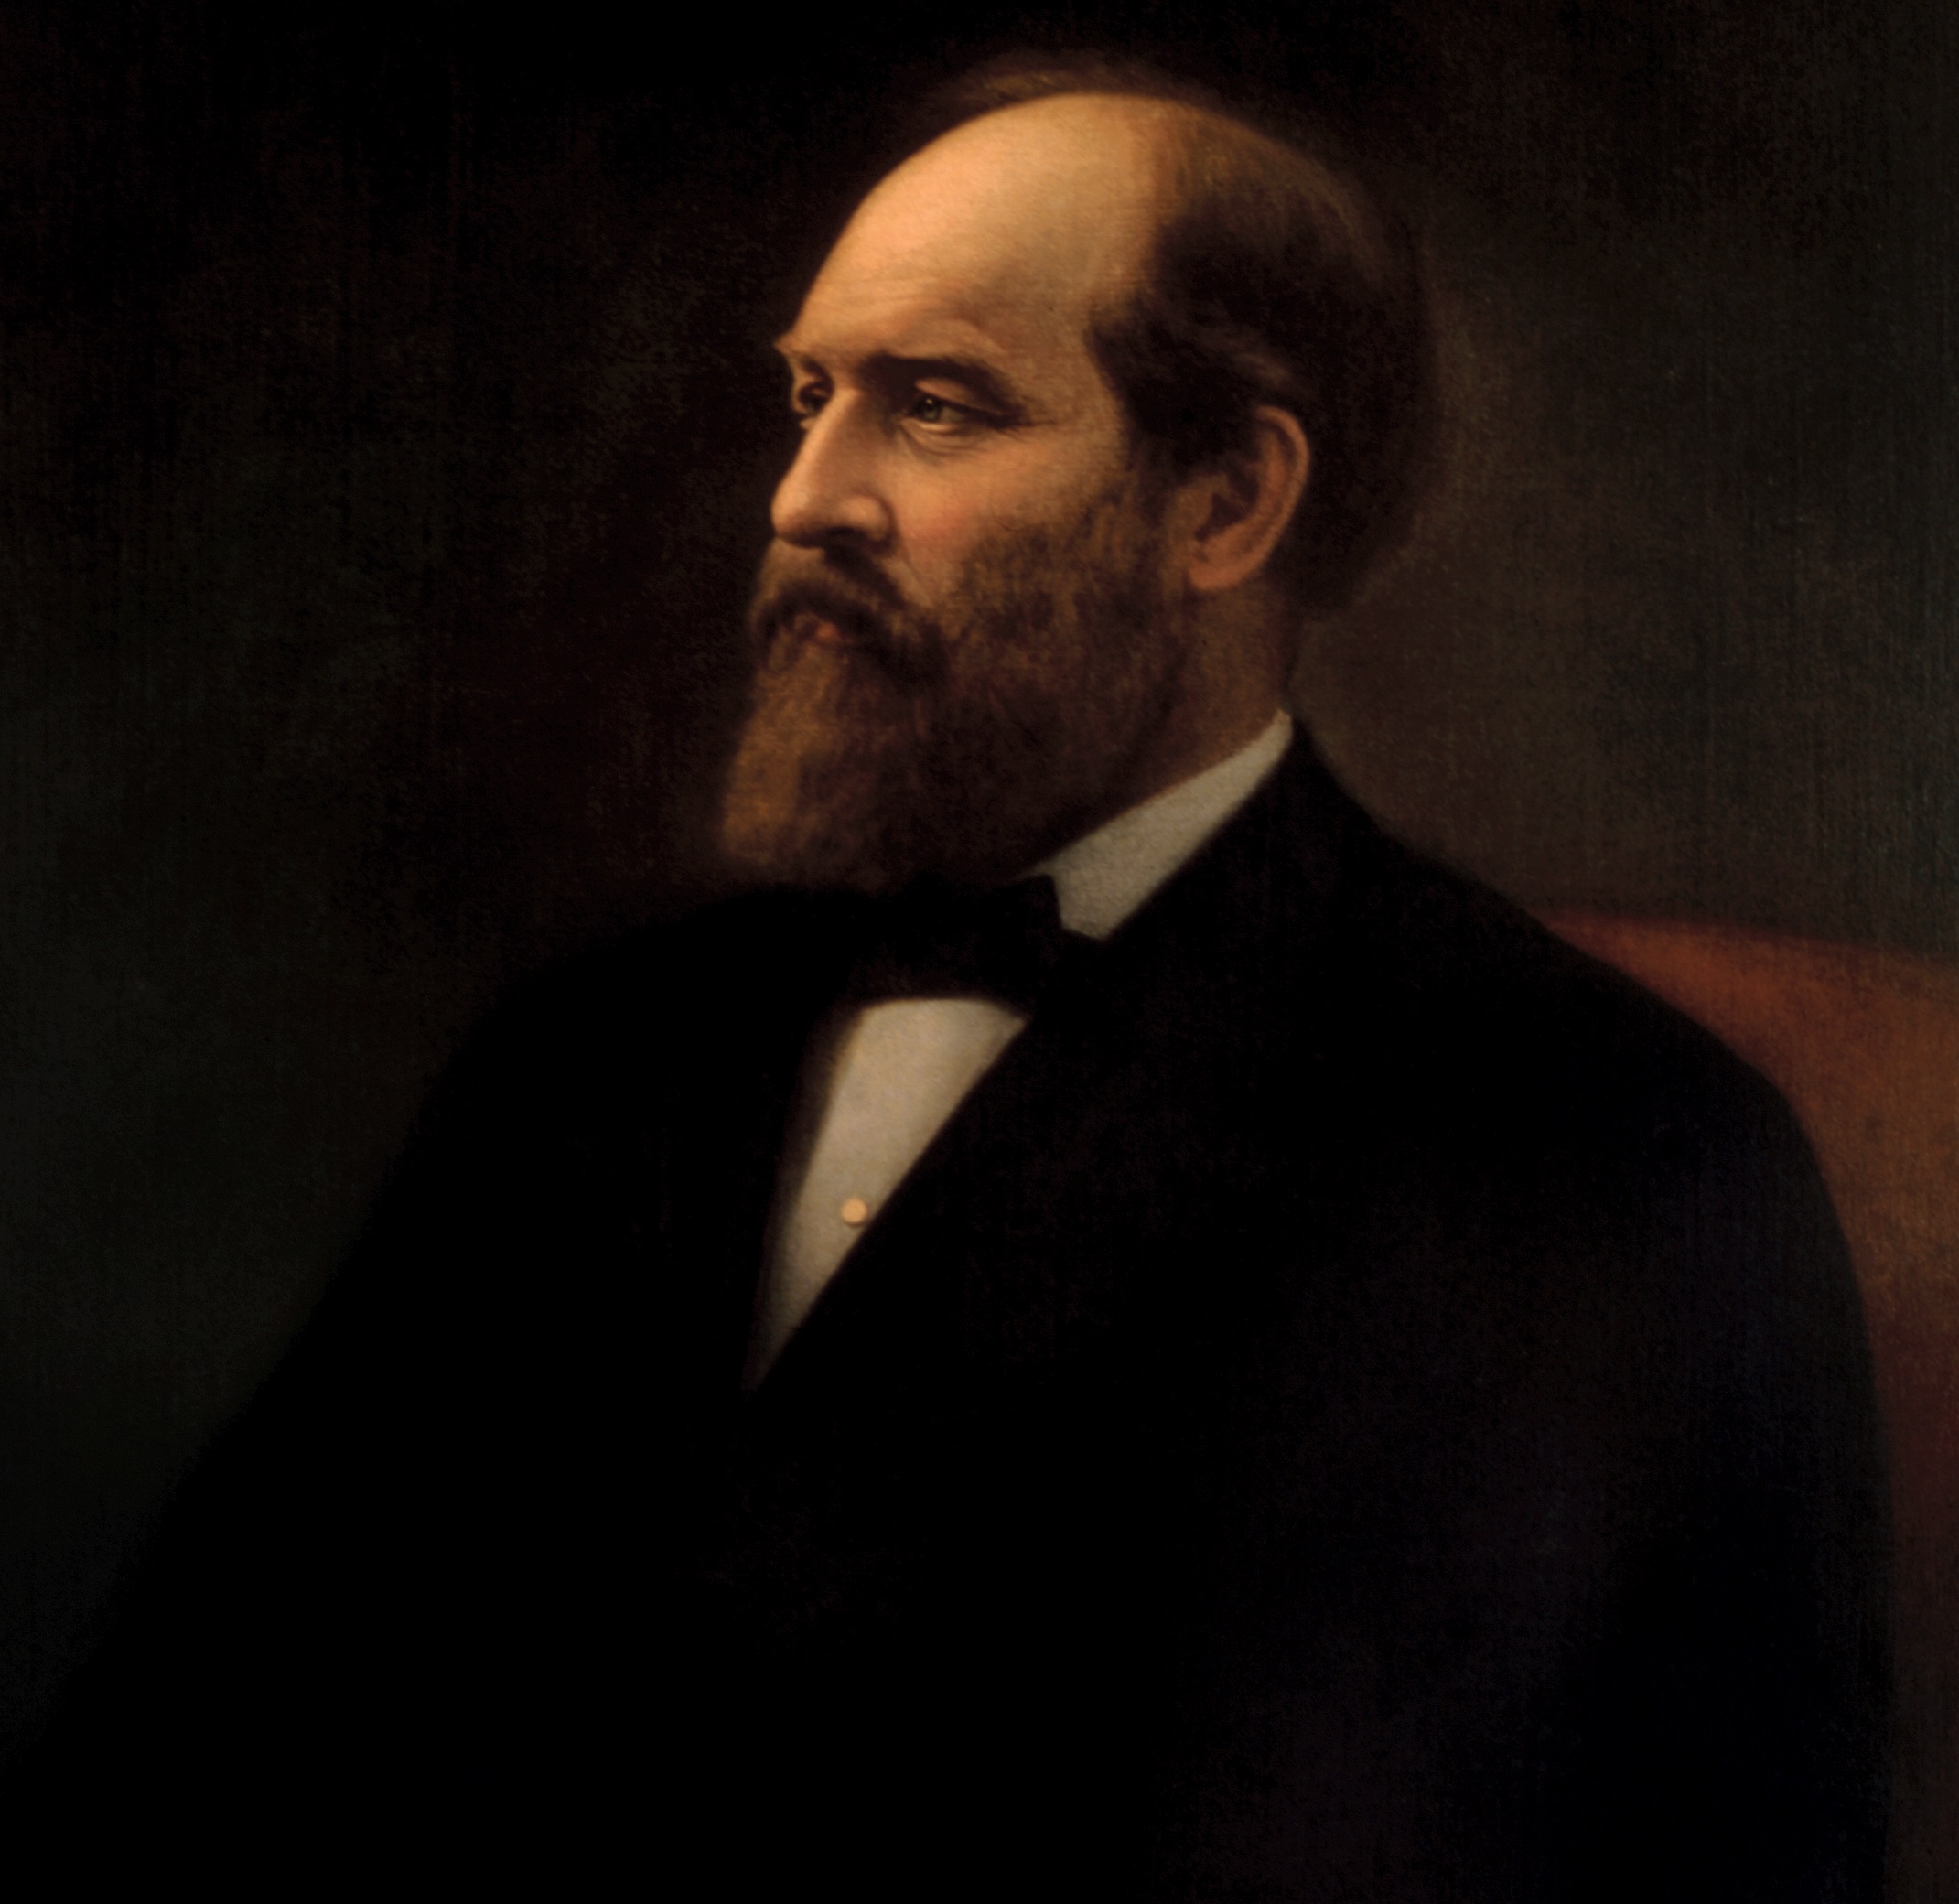 9. James Garfield
James A. Garfield, the 20th president of the United States, for only a few months in 1881, was shot to death on July 2, 
having only been in office for four months. He was on his way to visit his sick wife in hospital when he was shot in the back at the a railroad station in Washington D.C.